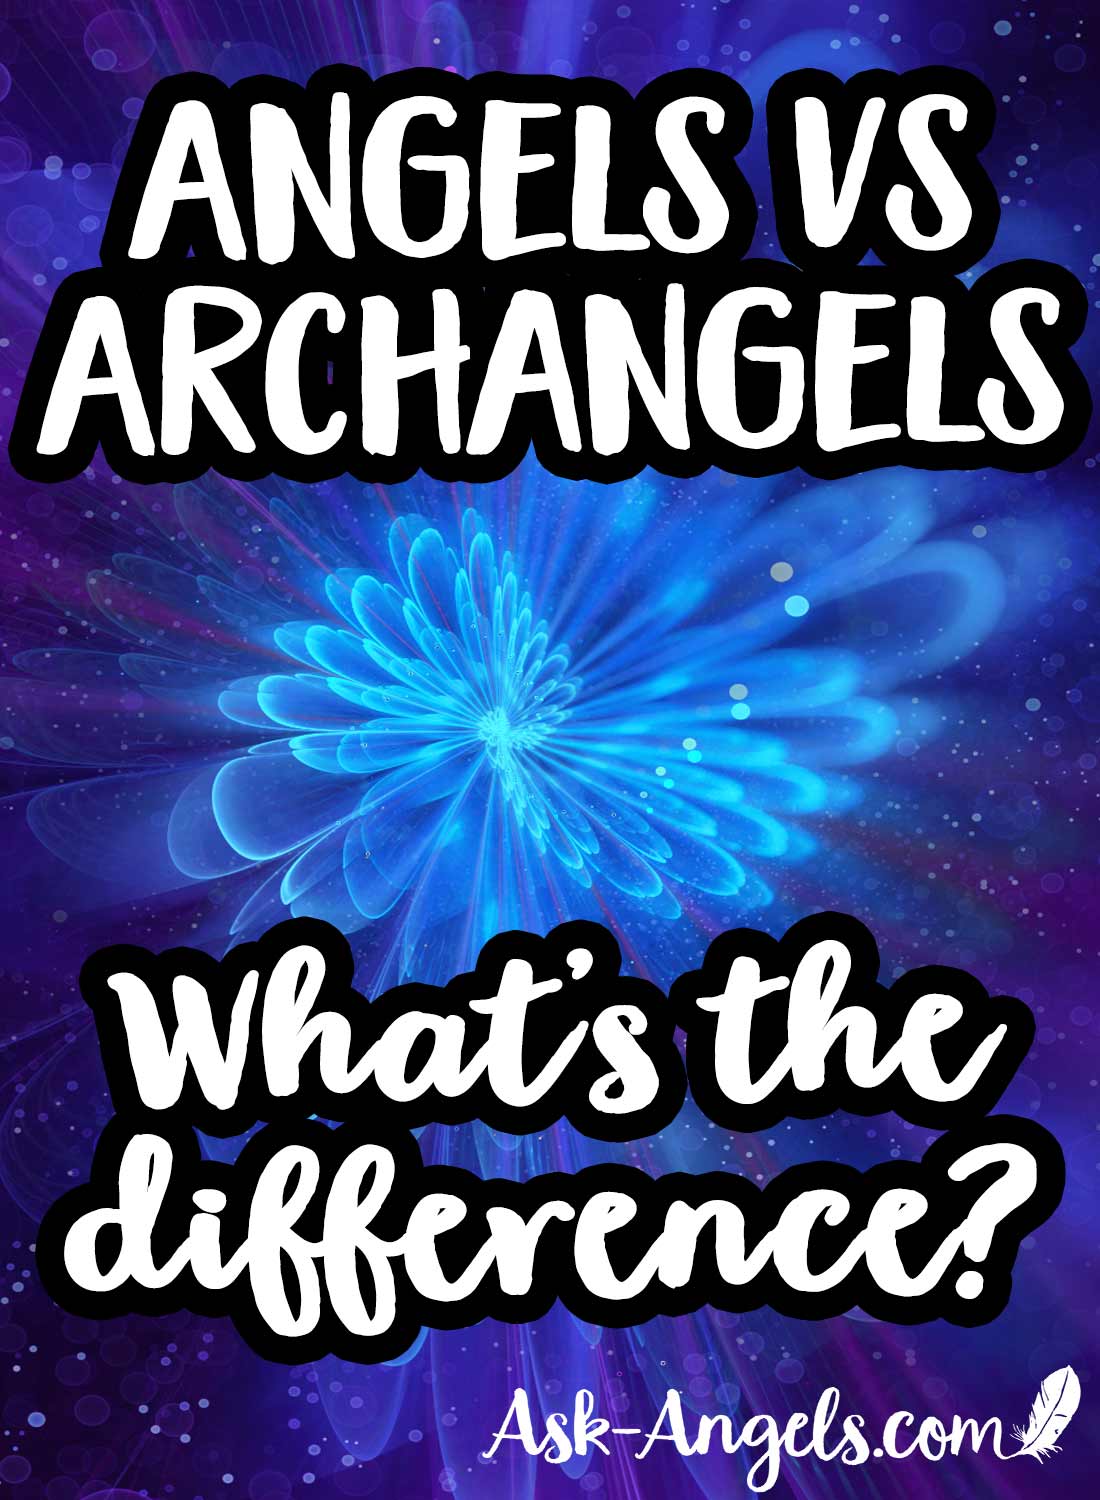 Angels vs Archangels... What's the difference?